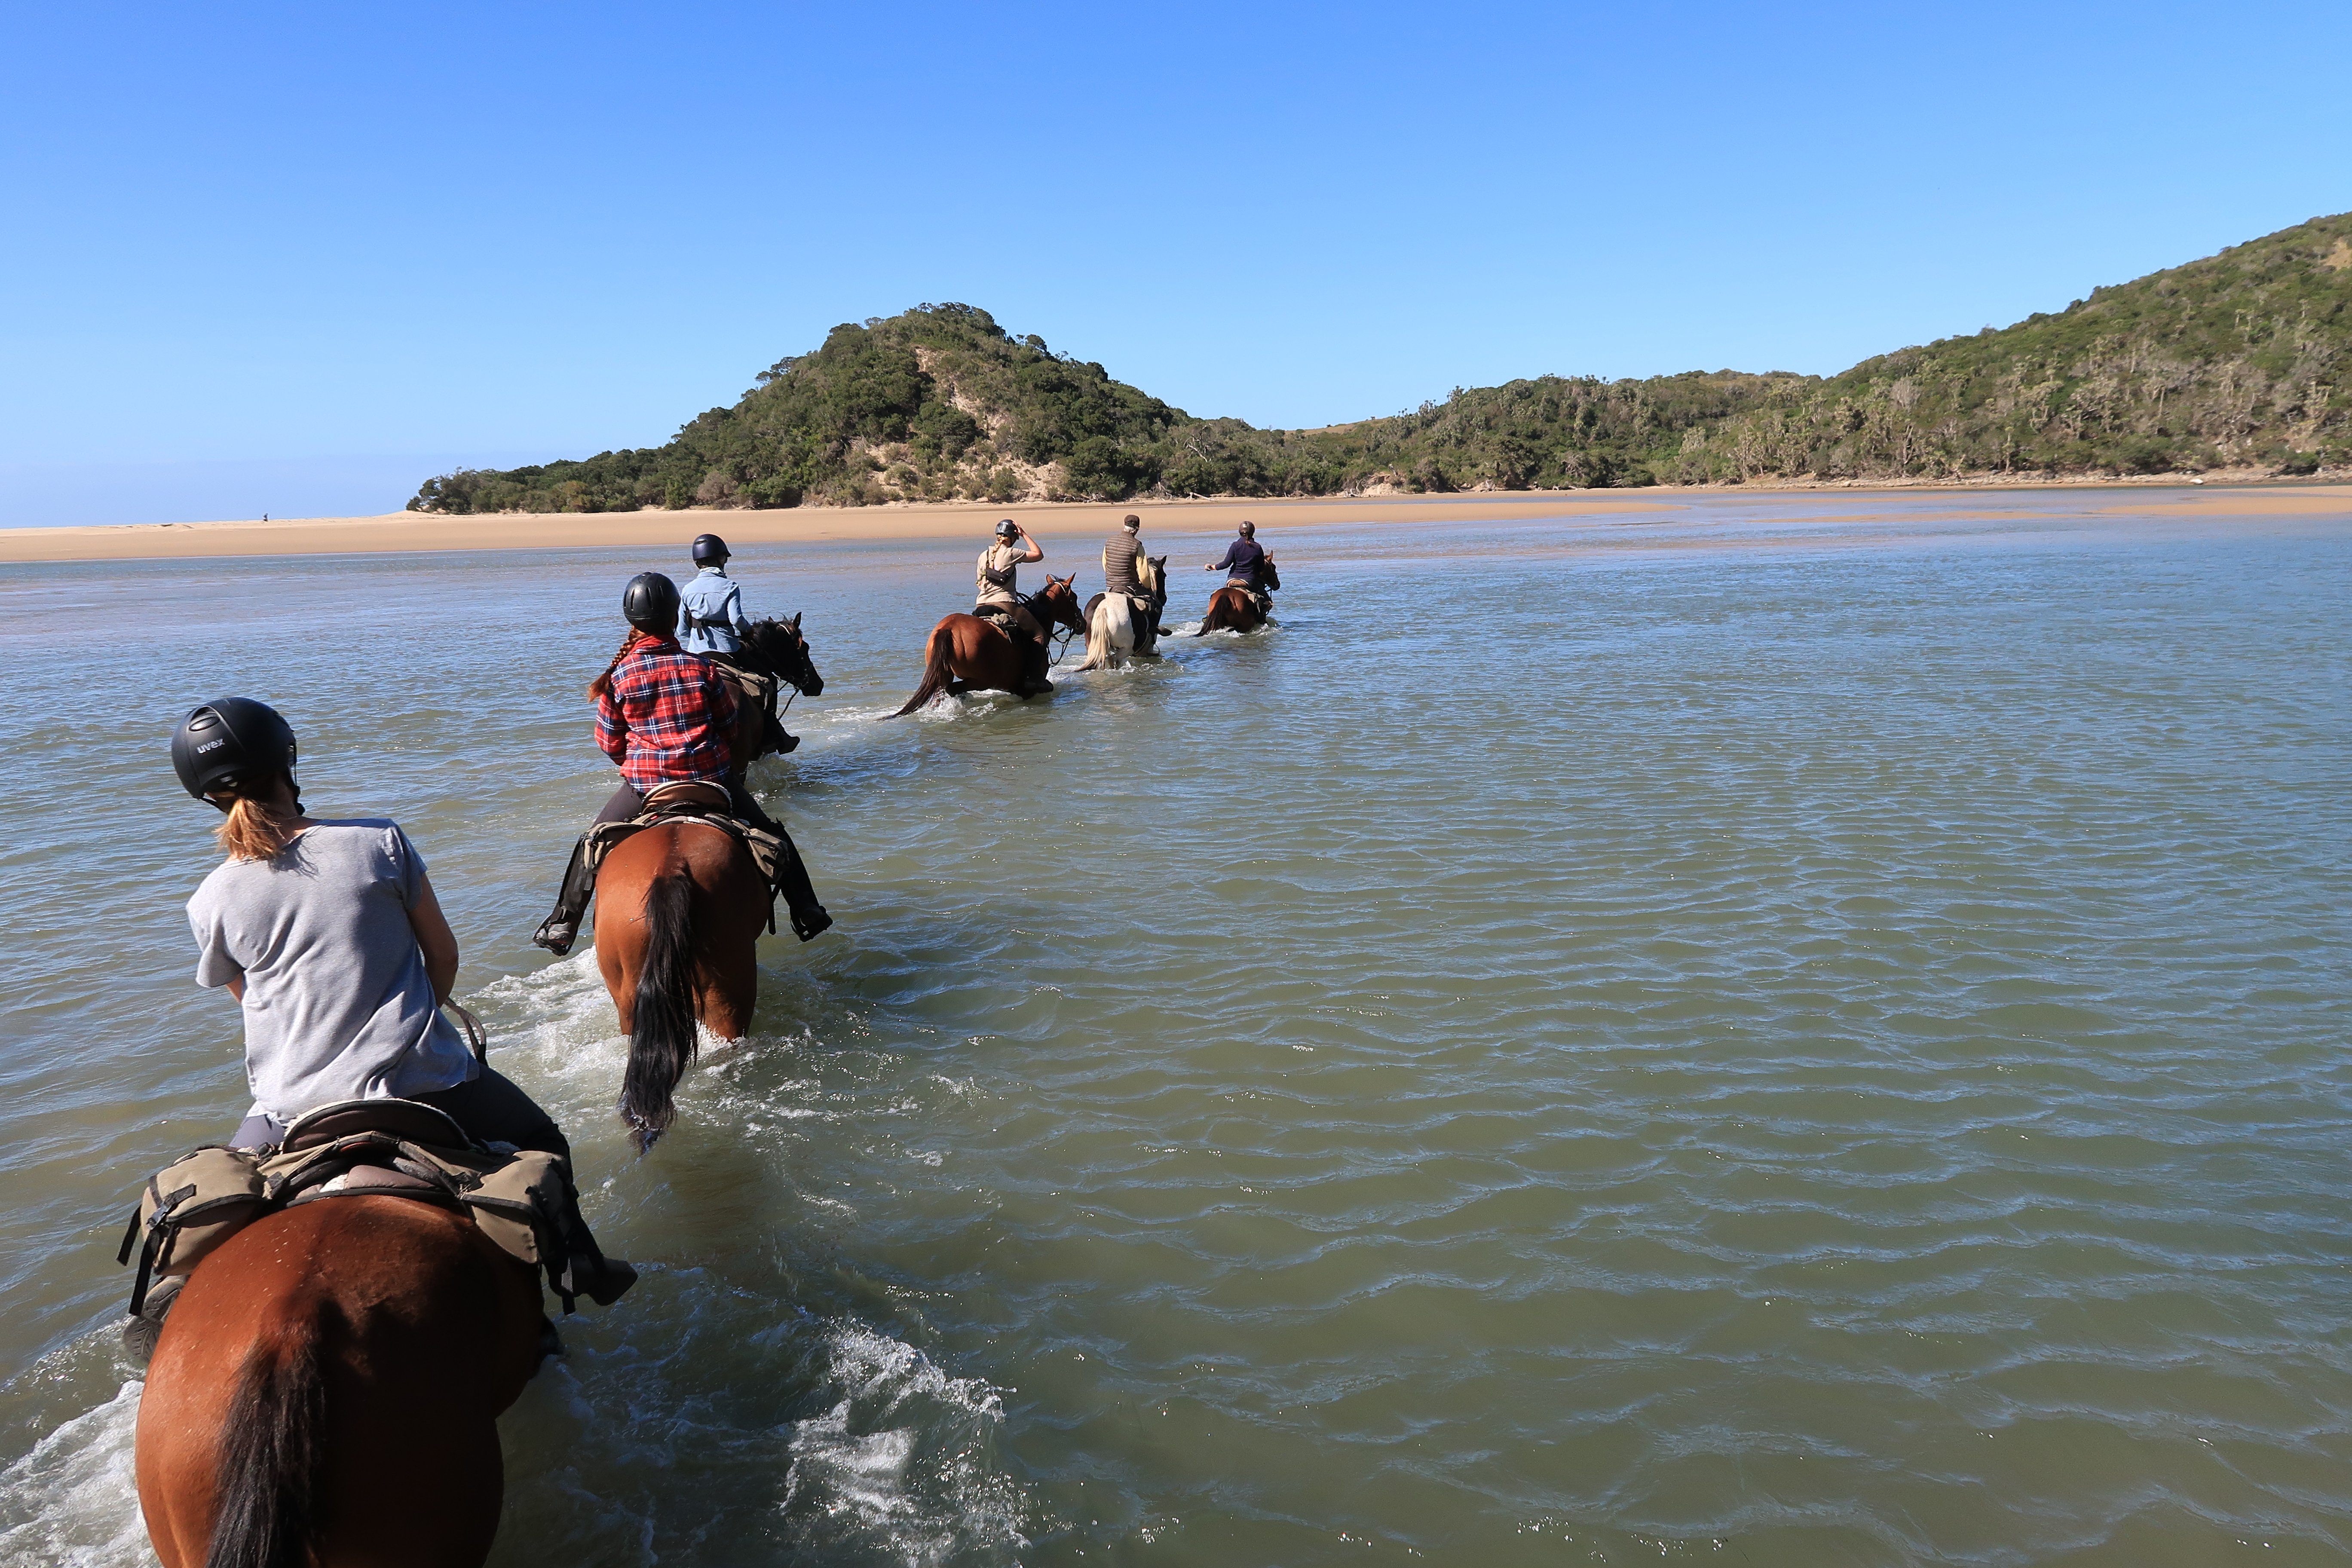 Horseback Riding Through South African Waters